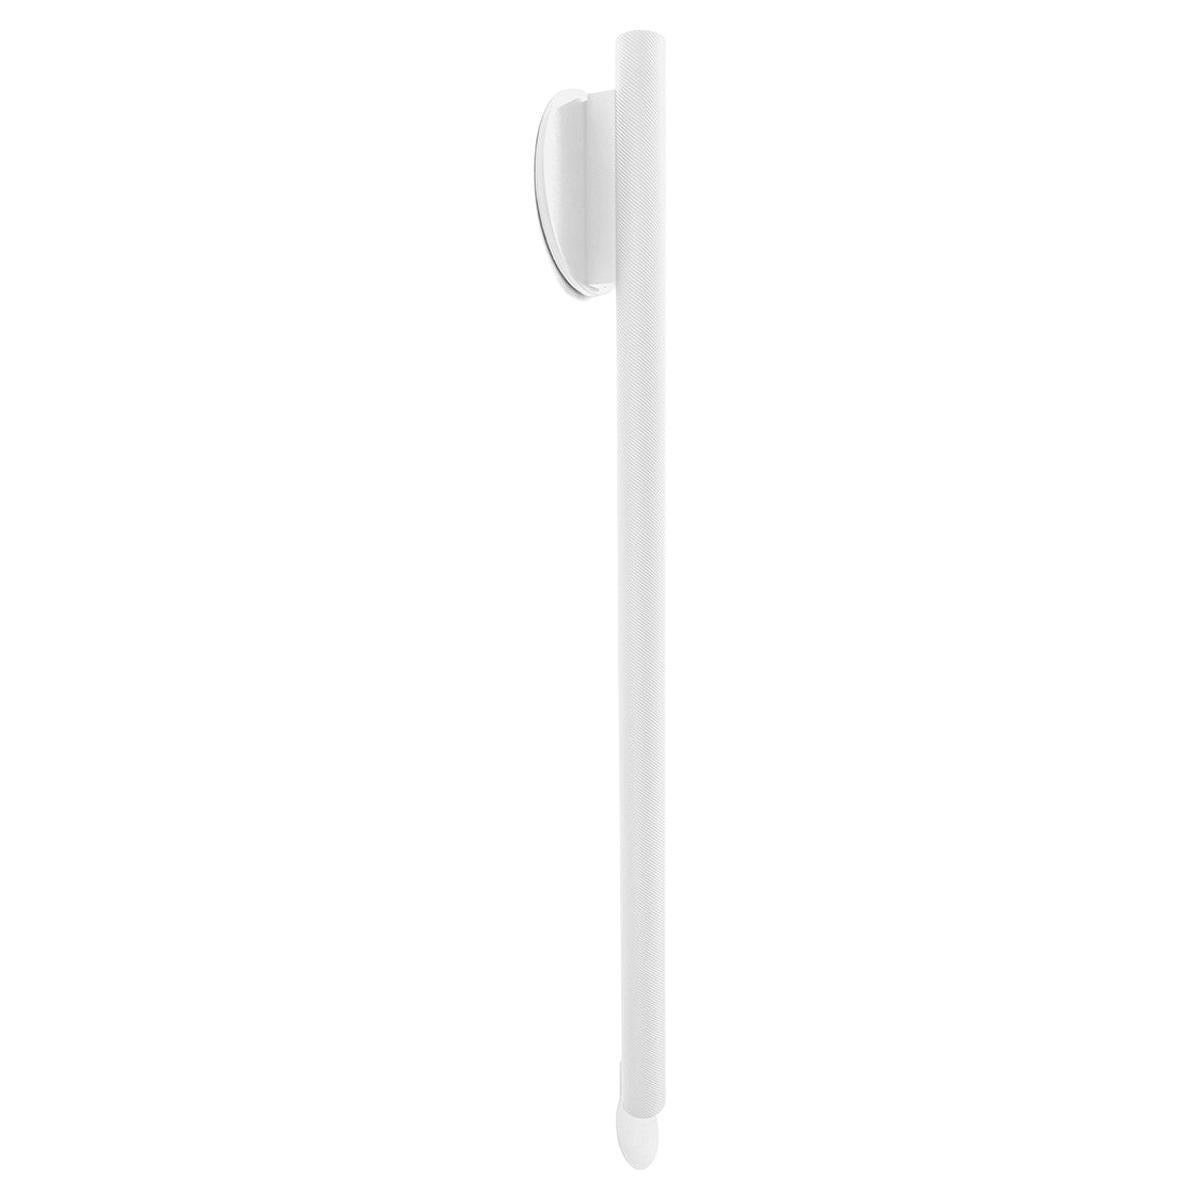 Flos Flauta Spiga Large Indoor/Outdoor Wall Sconce in White by Patricia Urquiola